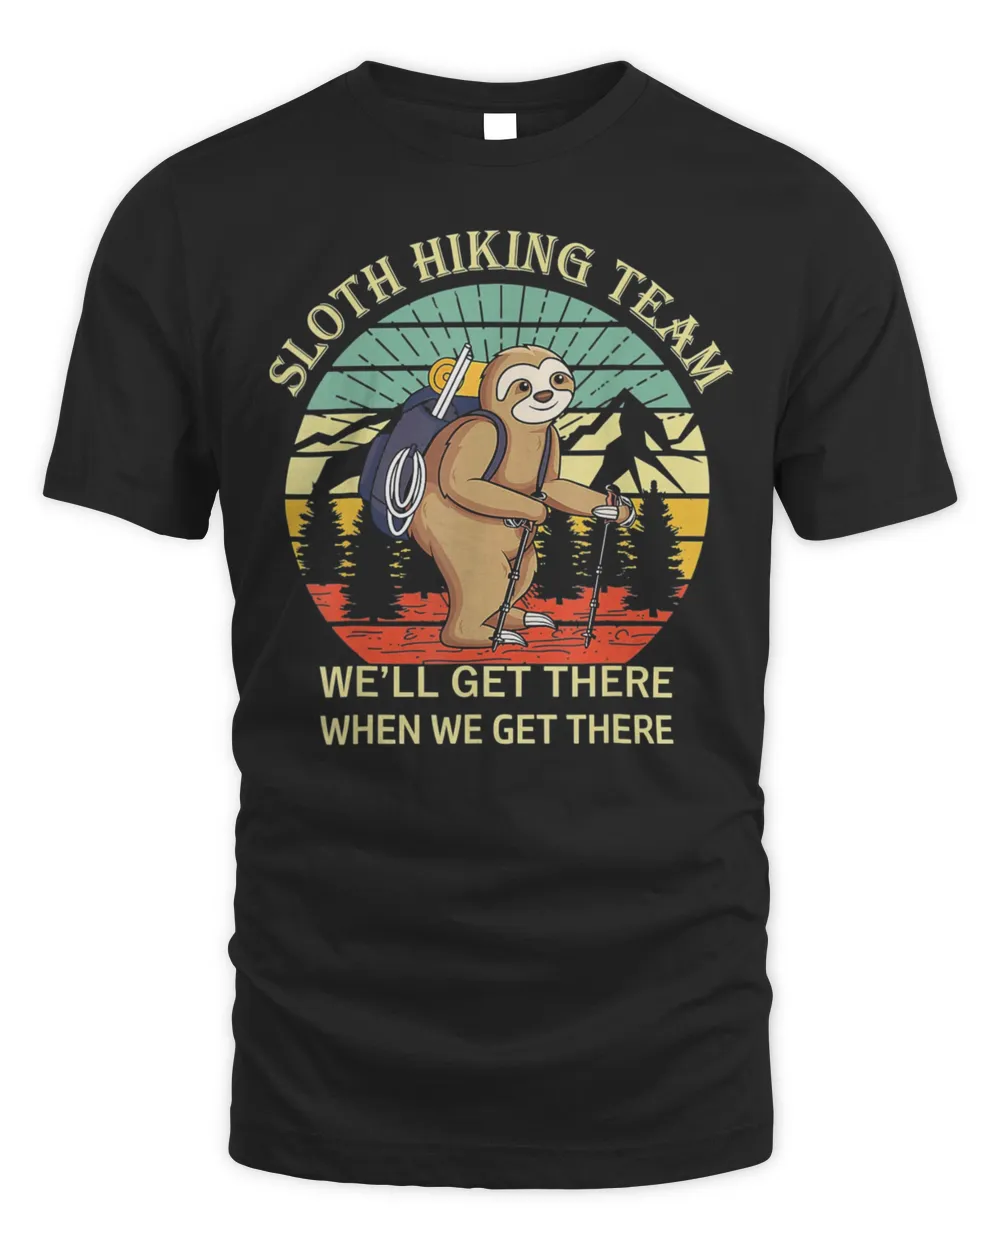 Retro sloth Hiking team we’ll get there when we get there T-Shirt